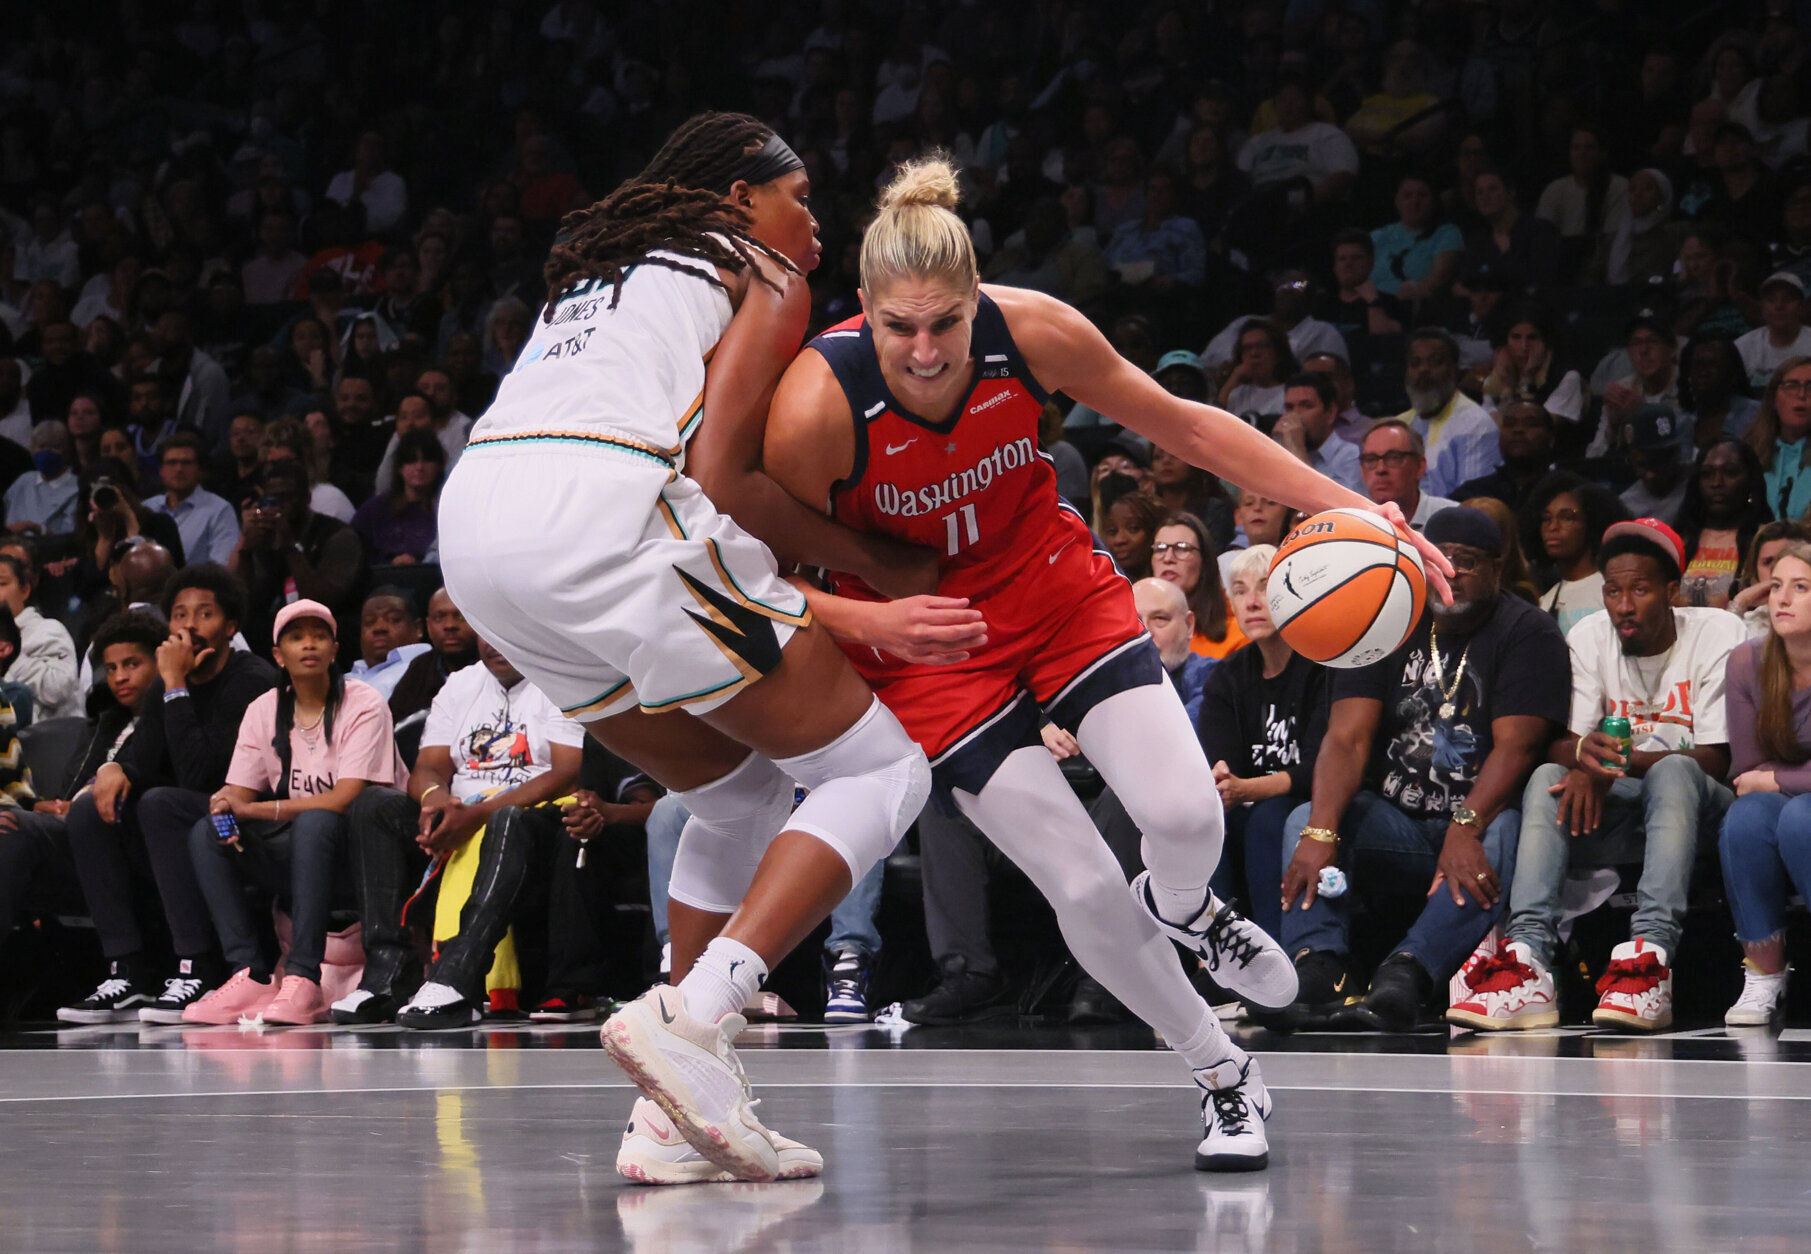 <h3>Questions surround the Mystics entering 2024 season</h3>
<p>After a historic season for the WNBA, the Washington Mystics enter an offseason filled with uncertainty and questions concerning the future of its franchise star.</p>
<p>In its first year under <a href="https://wtop.com/washington-mystics/2022/11/mike-thibault-retiring-as-head-coach-of-mystics-son-eric-thibault-to-take-over/">head coach Eric Thibault,</a> Washington finished in seventh place — three games under .500 — and stuck taking on the New York Liberty in the first round of the playoffs. The Mystics postseason quickly ended on the road following <a href="https://wtop.com/washington-mystics/2023/09/liberty-advance-to-wnba-playoff-semis-for-first-time-since-2015-with-90-85-win-over-mystics-in-ot/">a two-game sweep</a> by the future Eastern Conference champions.</p>
<p>Now, heading into 2023, Washington has critical questions, the largest being the future of star Elena Delle Donne.</p>
<p>The two-time league MVP — who led Washington to its only WNBA title in 2019 and quickly <a href="https://apnews.com/mvp-delle-donne-signs-4-year-deal-with-wnba-champion-mystics-1e1ba31eeade14ab1ffb0d824670b92f">re-signed in 2020</a> — is an <a href="https://www.washingtonpost.com/sports/2023/09/21/mystics-offseason-elena-delle-donne/">unrestricted free agent</a> along with Natasha Cloud, Tianna Hawkins and Kristi Toliver. It remains unclear if the former Olympian will remain with the Mystics.</p>
<p>In 2023, she averaged <a href="https://stats.wnba.com/player/203399/">16.7 points a game</a> with a 48.5 field goal percentage and shot almost 40% from 3-point range. However, after the <a href="https://wtop.com/washington-mystics/2023/02/elena-delle-donne-back-at-team-usa-after-greatest-offseason-ever/">&#8220;greatest offseason ever,&#8221;</a> the former Delaware star only played 23 games (her fewest in Washington, not including her 2021 injury-plagued season) and only averaged 27.5 minutes a game.</p>
<p>Will Mystics management be willing to sign the 34-year-old to a new deal, understanding that she may be limited due to recurring back injuries? Who else in Washington&#8217;s unrestricted free agent list may return next season?</p>
<p>Will former Riverdale Baptist School player and Mystics center Shakira Austin <a href="https://wtop.com/washington-mystics/2023/12/washington-mystics-c-shakira-austin-has-surgery-on-torn-labrum-recovery-expected-to-take-4-6-months/">recover from a torn labrum</a> in time for the 2024 season? Lastly, what addition could Washington make with the No. 6 pick in the 2024 WNBA Draft in April?</p>
<p>Meanwhile, the Mystics owners, Monumental Sports and Entertainment, are looking to move its NBA and NHL teams to a new arena in Virginia.</p>
<p><a href="https://wtop.com/local/2023/12/this-is-monumental-capitals-wizards-owners-partner-up-with-virginia-for-proposed-arena-entertainment-district-in-alexandria/">Current plans suggest</a> the Mystics would return to Chinatown and play in Capital One Arena, its former home for over two decades. But do Mystics fans welcome the move after making the cozy confines of Entertainment and Sports Arena in Southeast D.C. their home?</p>
<p>There are so many questions the Mystics will have to answer before their first regular season game on May 14 against the Liberty.</p>
<p><em>— José Umaña</em></p>
